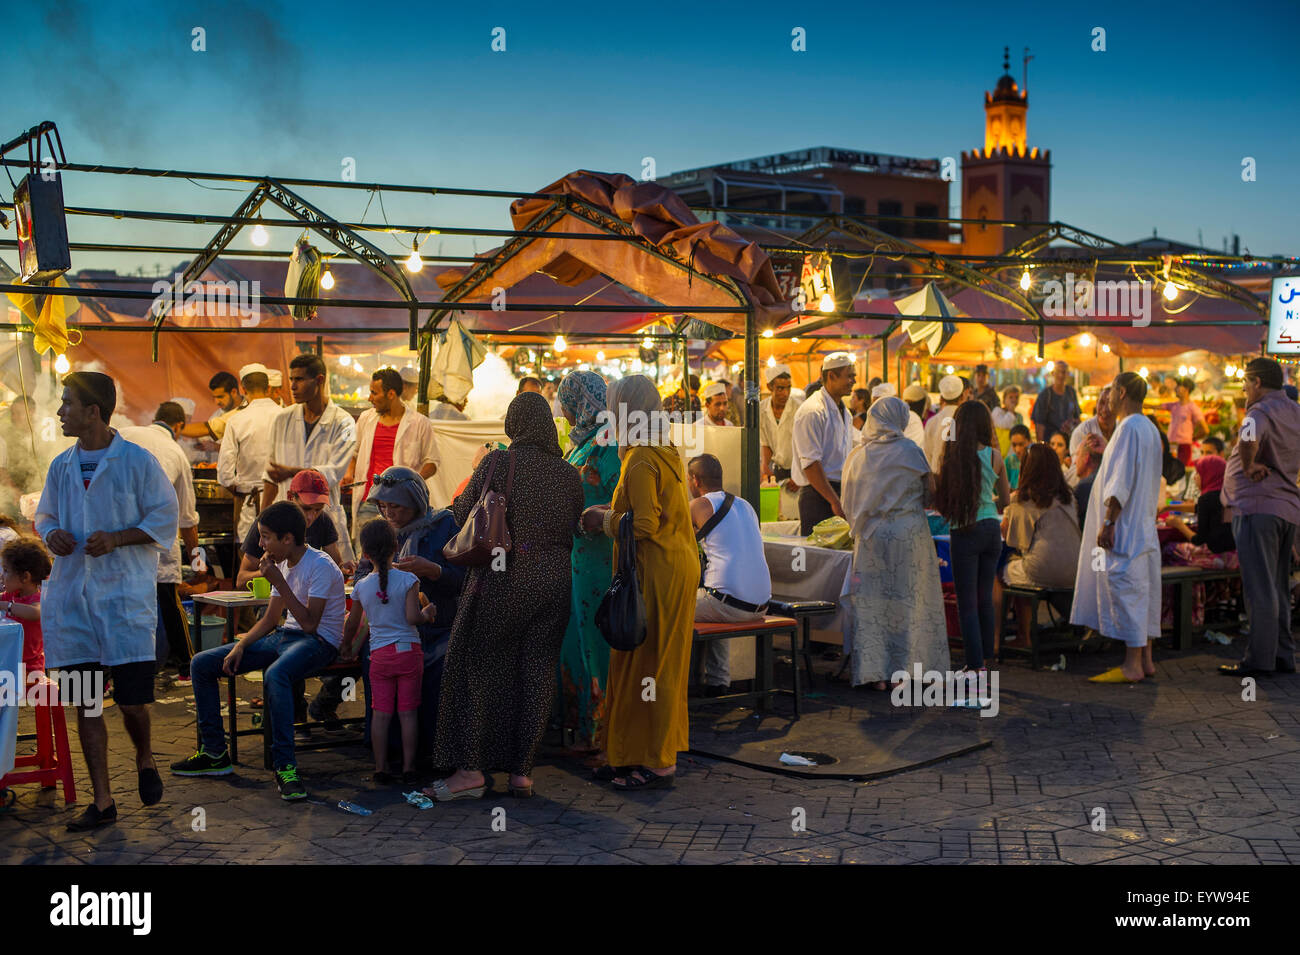 People at food stalls, Djemaa el Fna square, UNESCO World Heritage site, Marrakech, Morocco Stock Photo